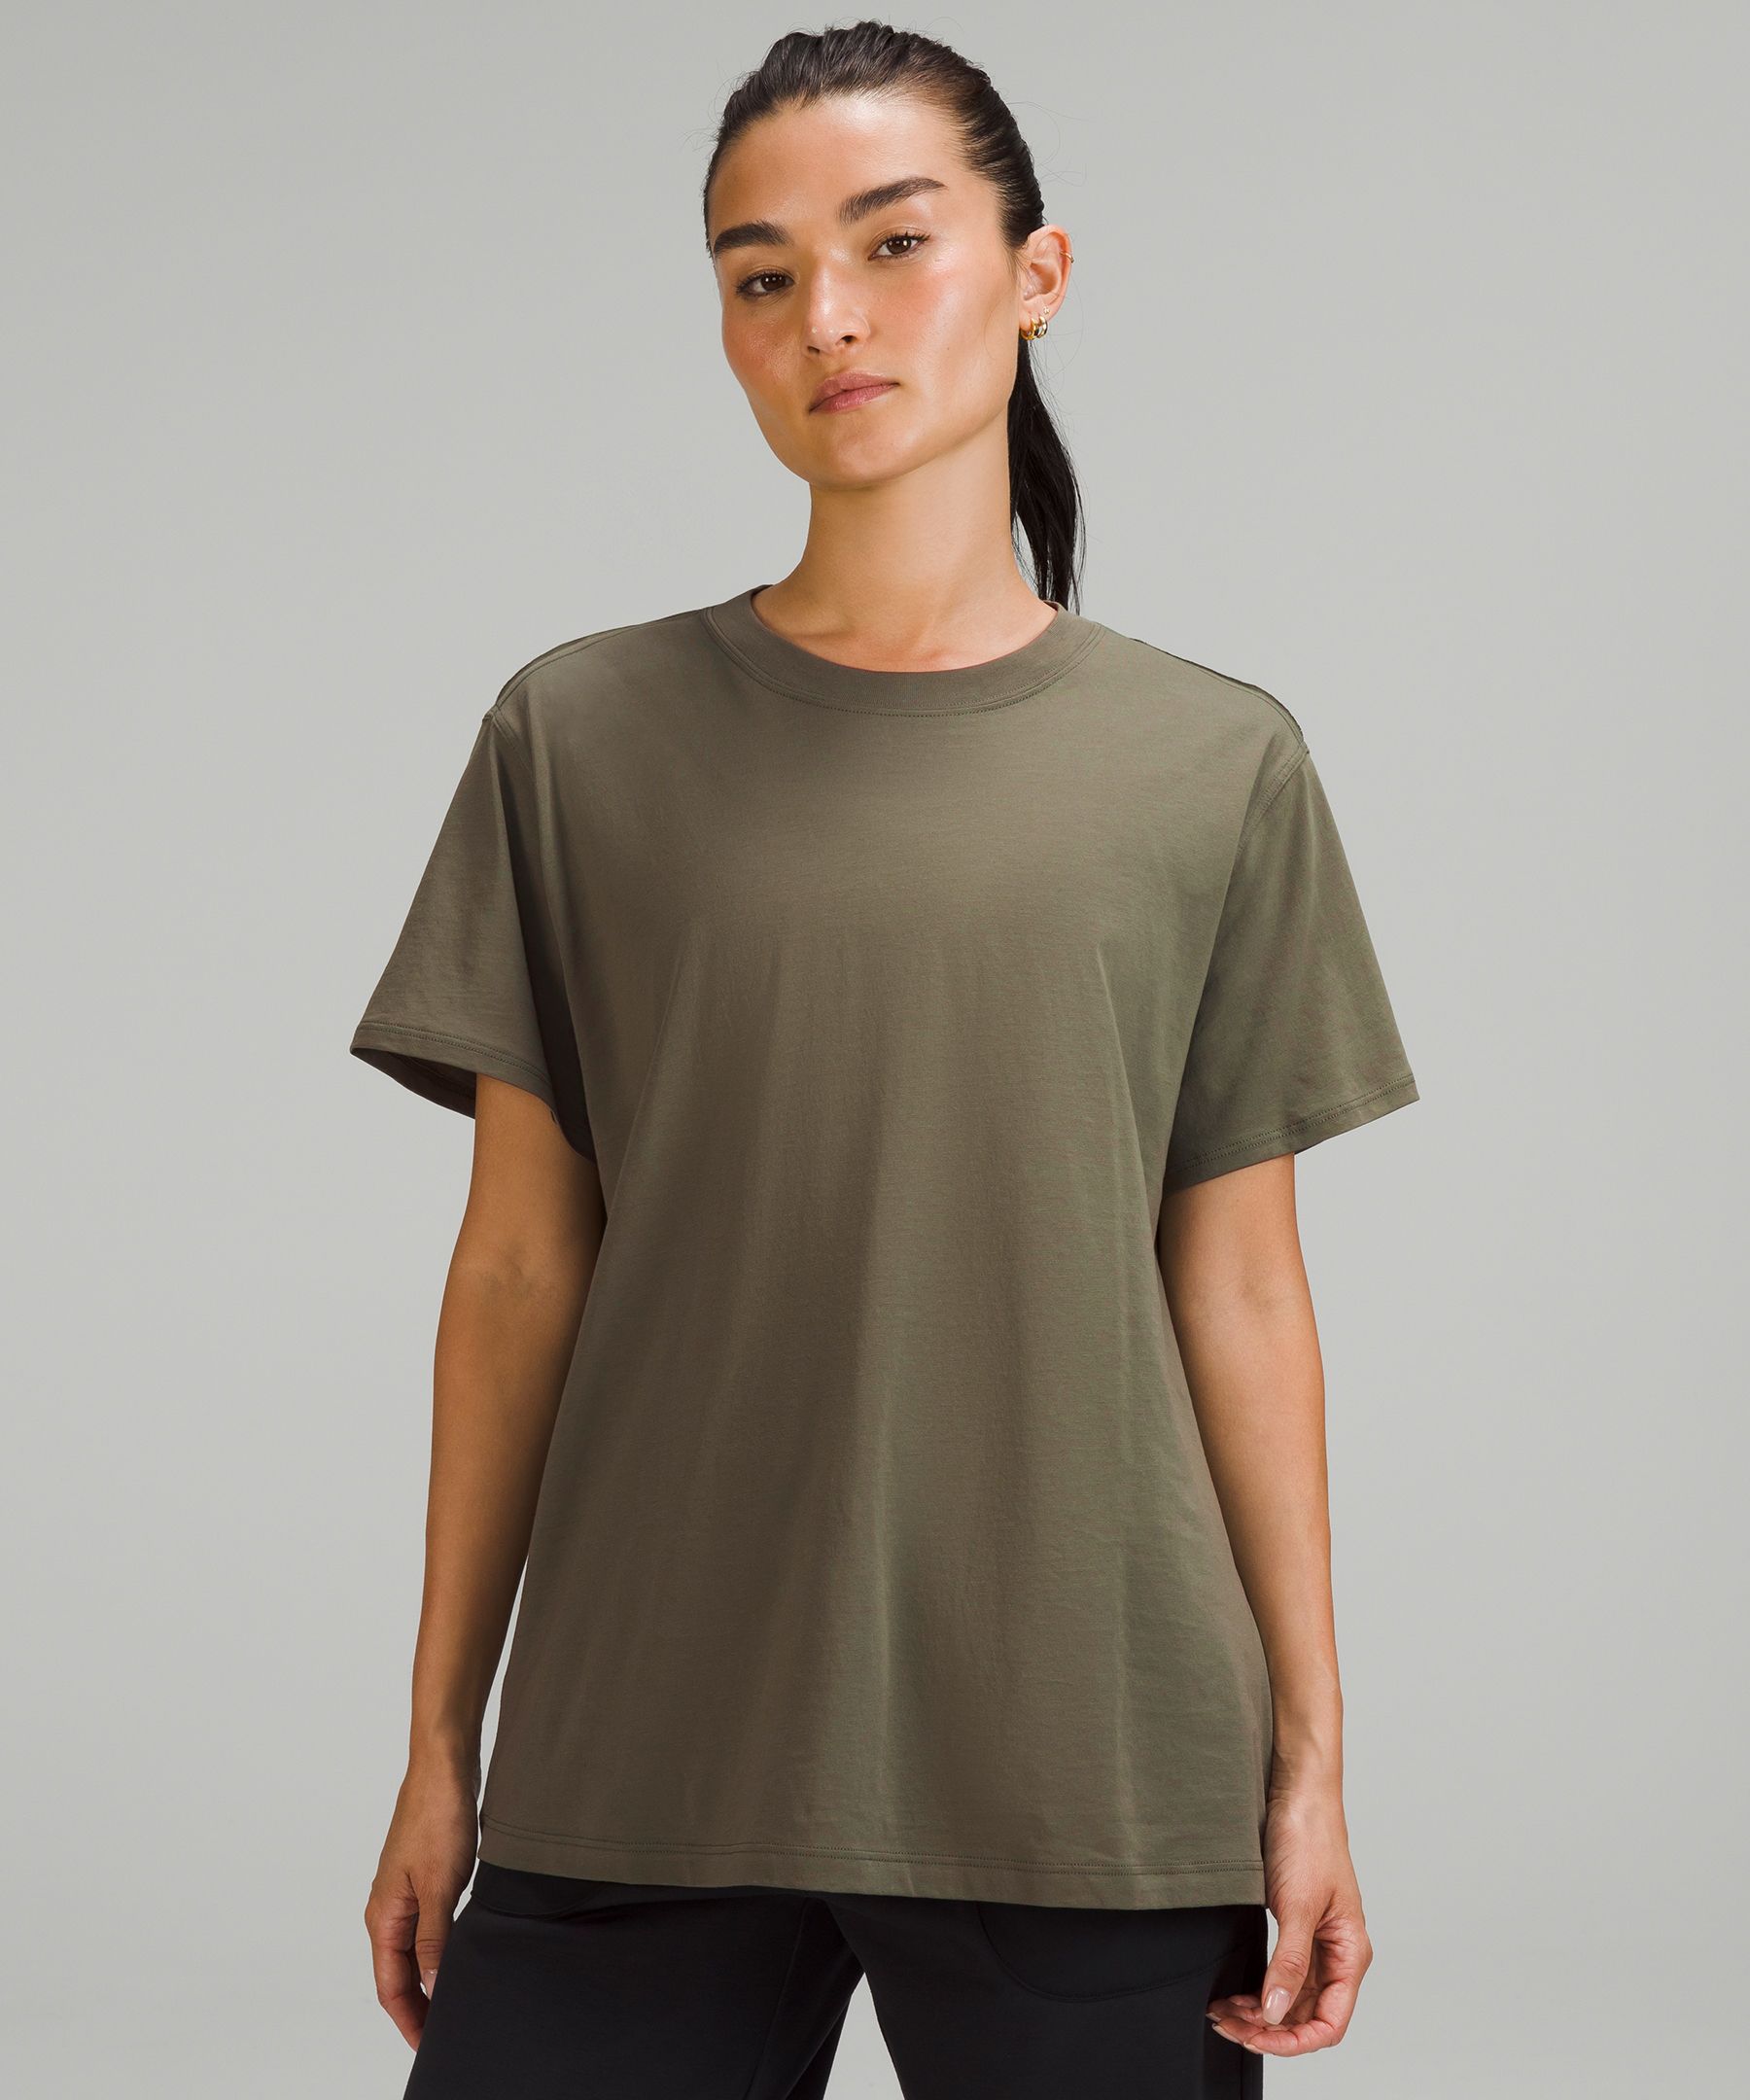 Lululemon All Yours Cotton T-shirt In Carob Brown